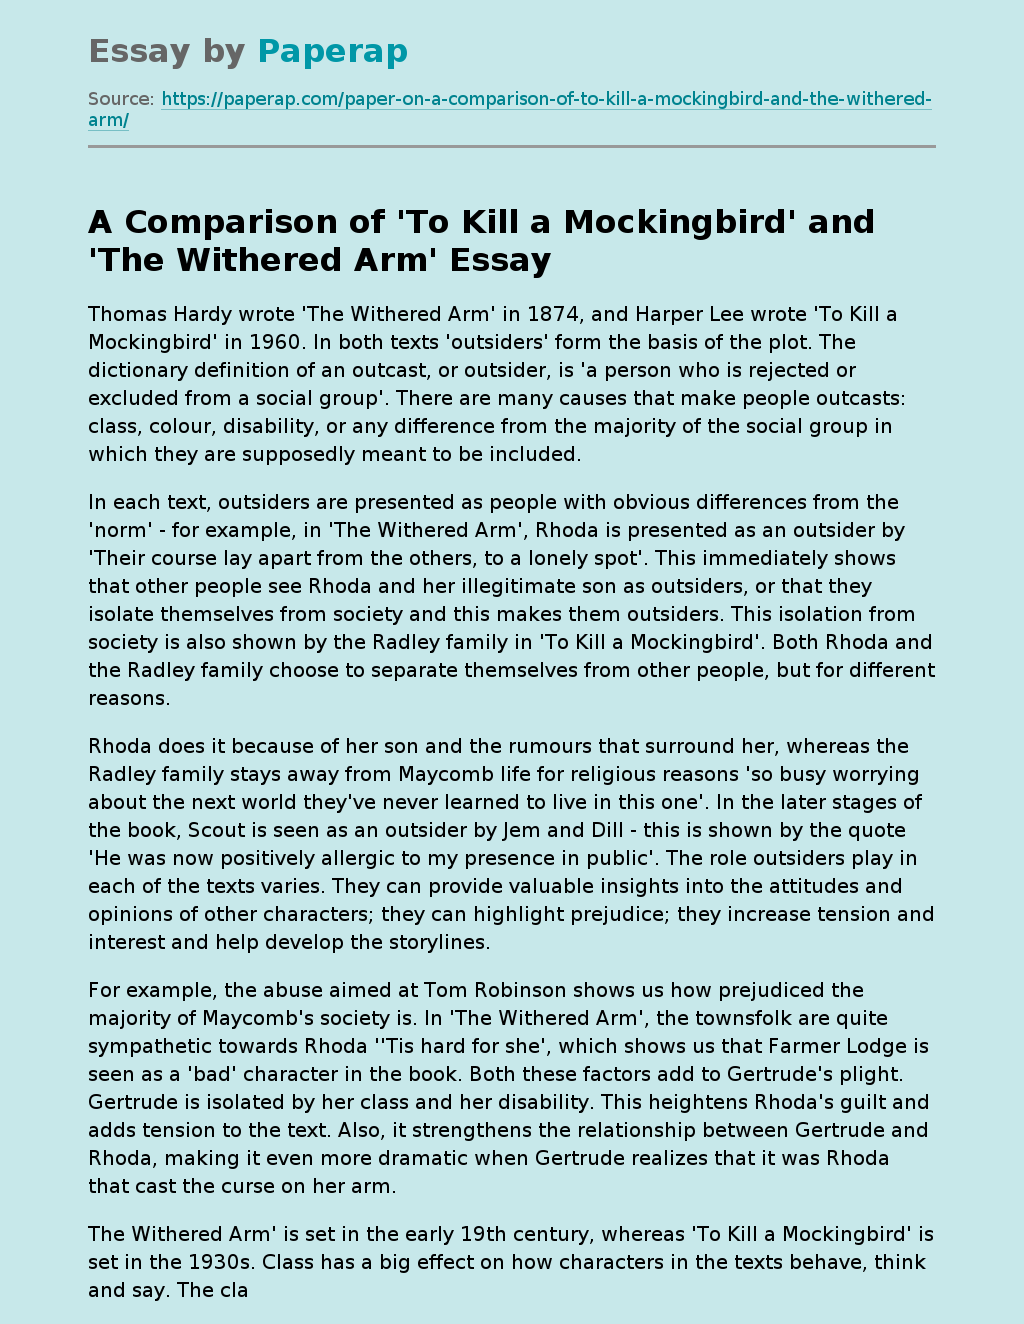 A Comparison of 'To Kill a Mockingbird' and 'The Withered Arm'